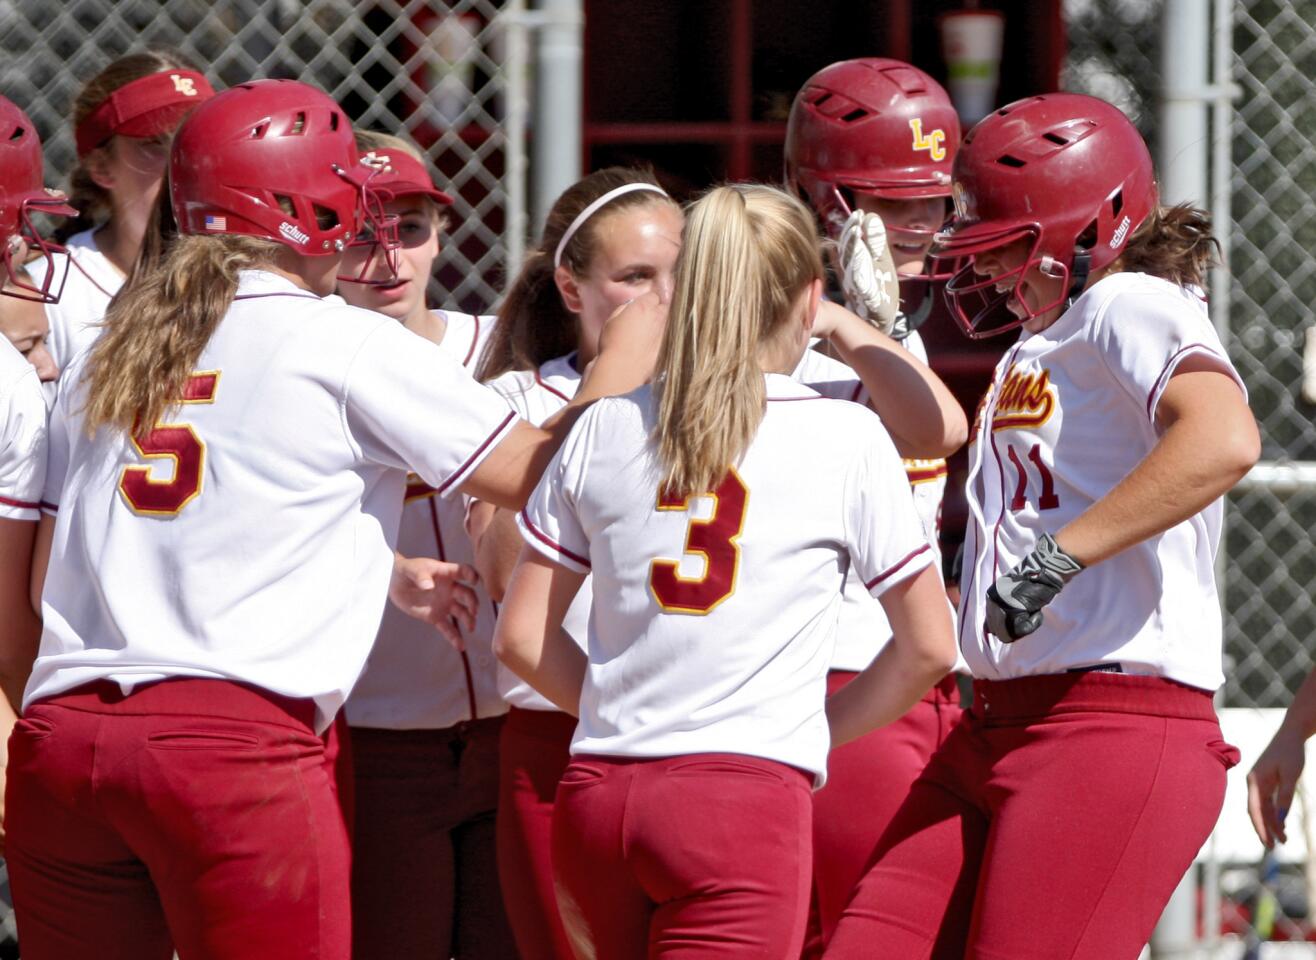 La Cañada High School softball player #11 Gillian Arnold is congratulated by her teammates after she hit a monster home-run in home game vs. San Marino High School, in La Cañada Flintridge on Friday, April 15, 2016. LCHS won the game in 5 innings 16-0.